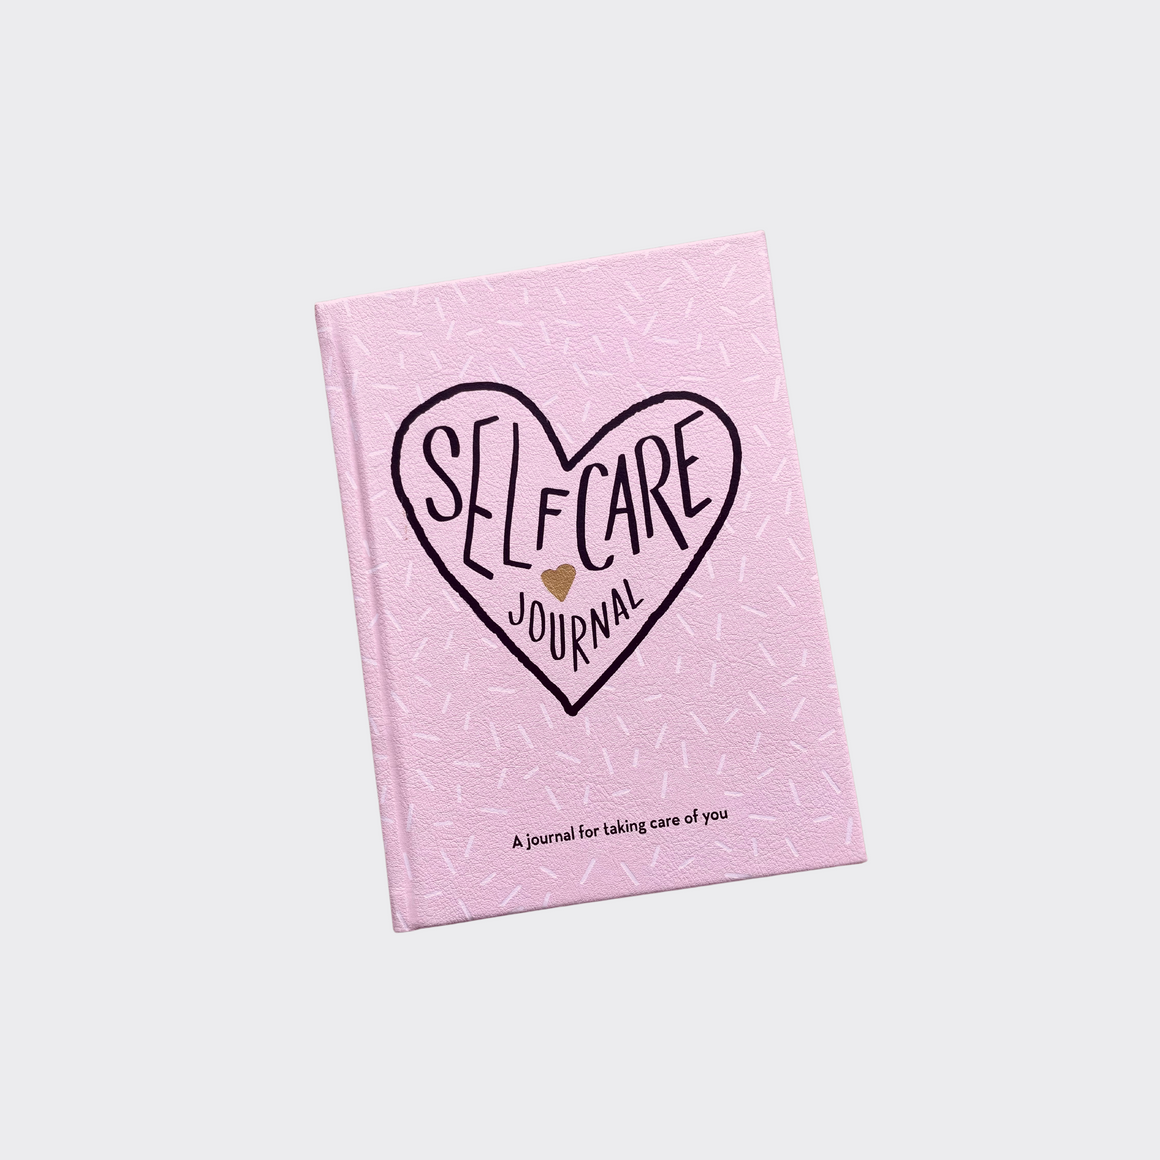 Self care journal / pink book with black writing inside a heart with a gold heart